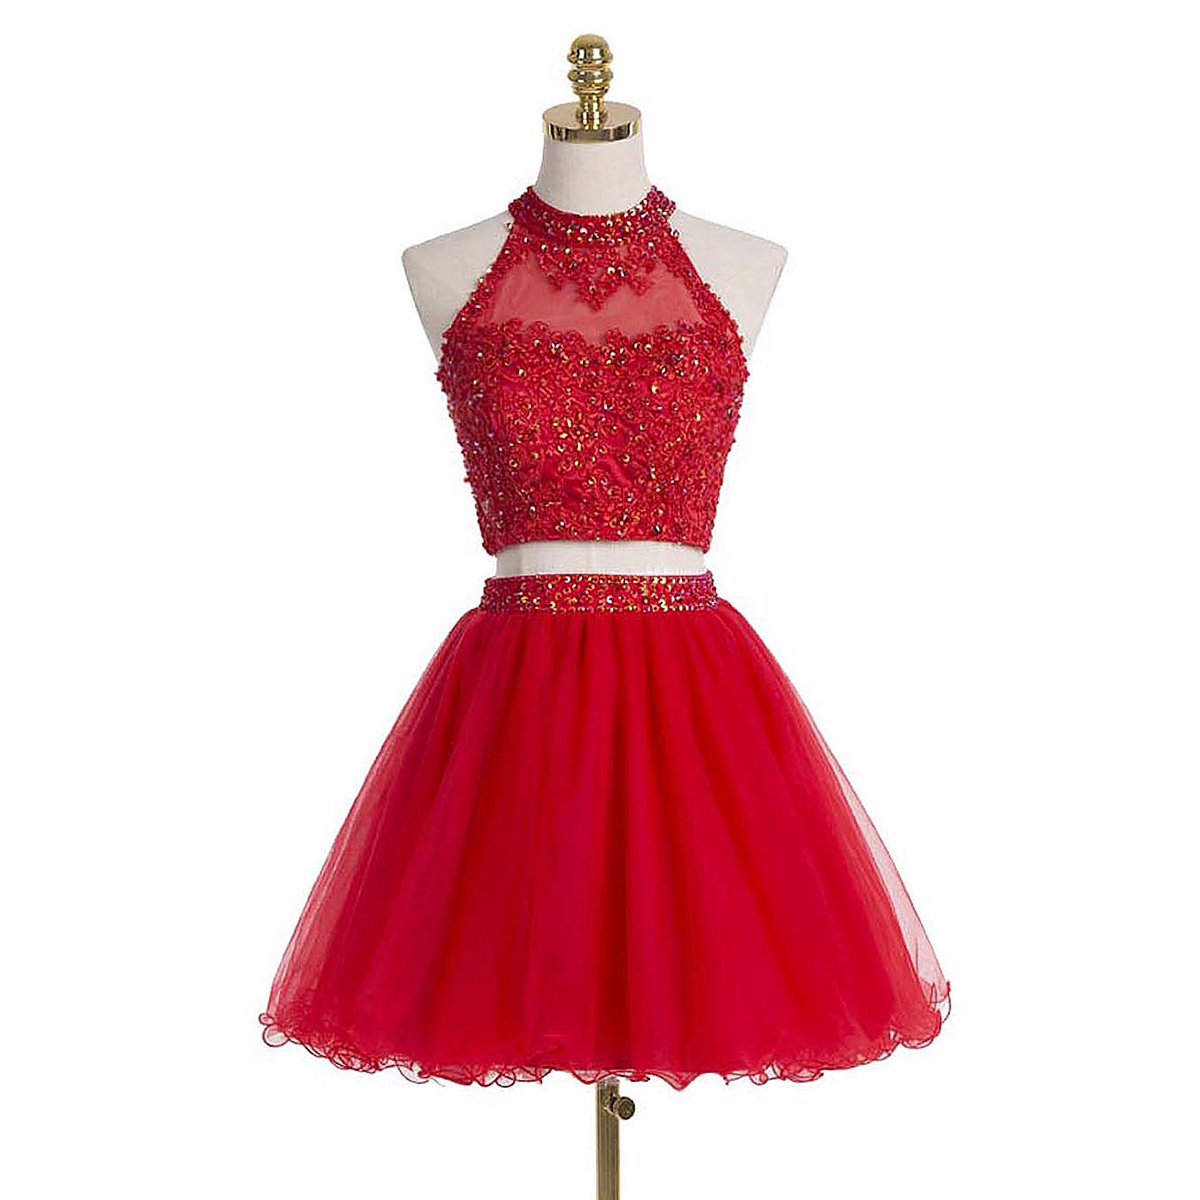 High Neck Red Homecoming Dress With Beads And Sequins, Short Homecoming Dress With Key Hole Back, Two Piece Tulle Homecoming Dress